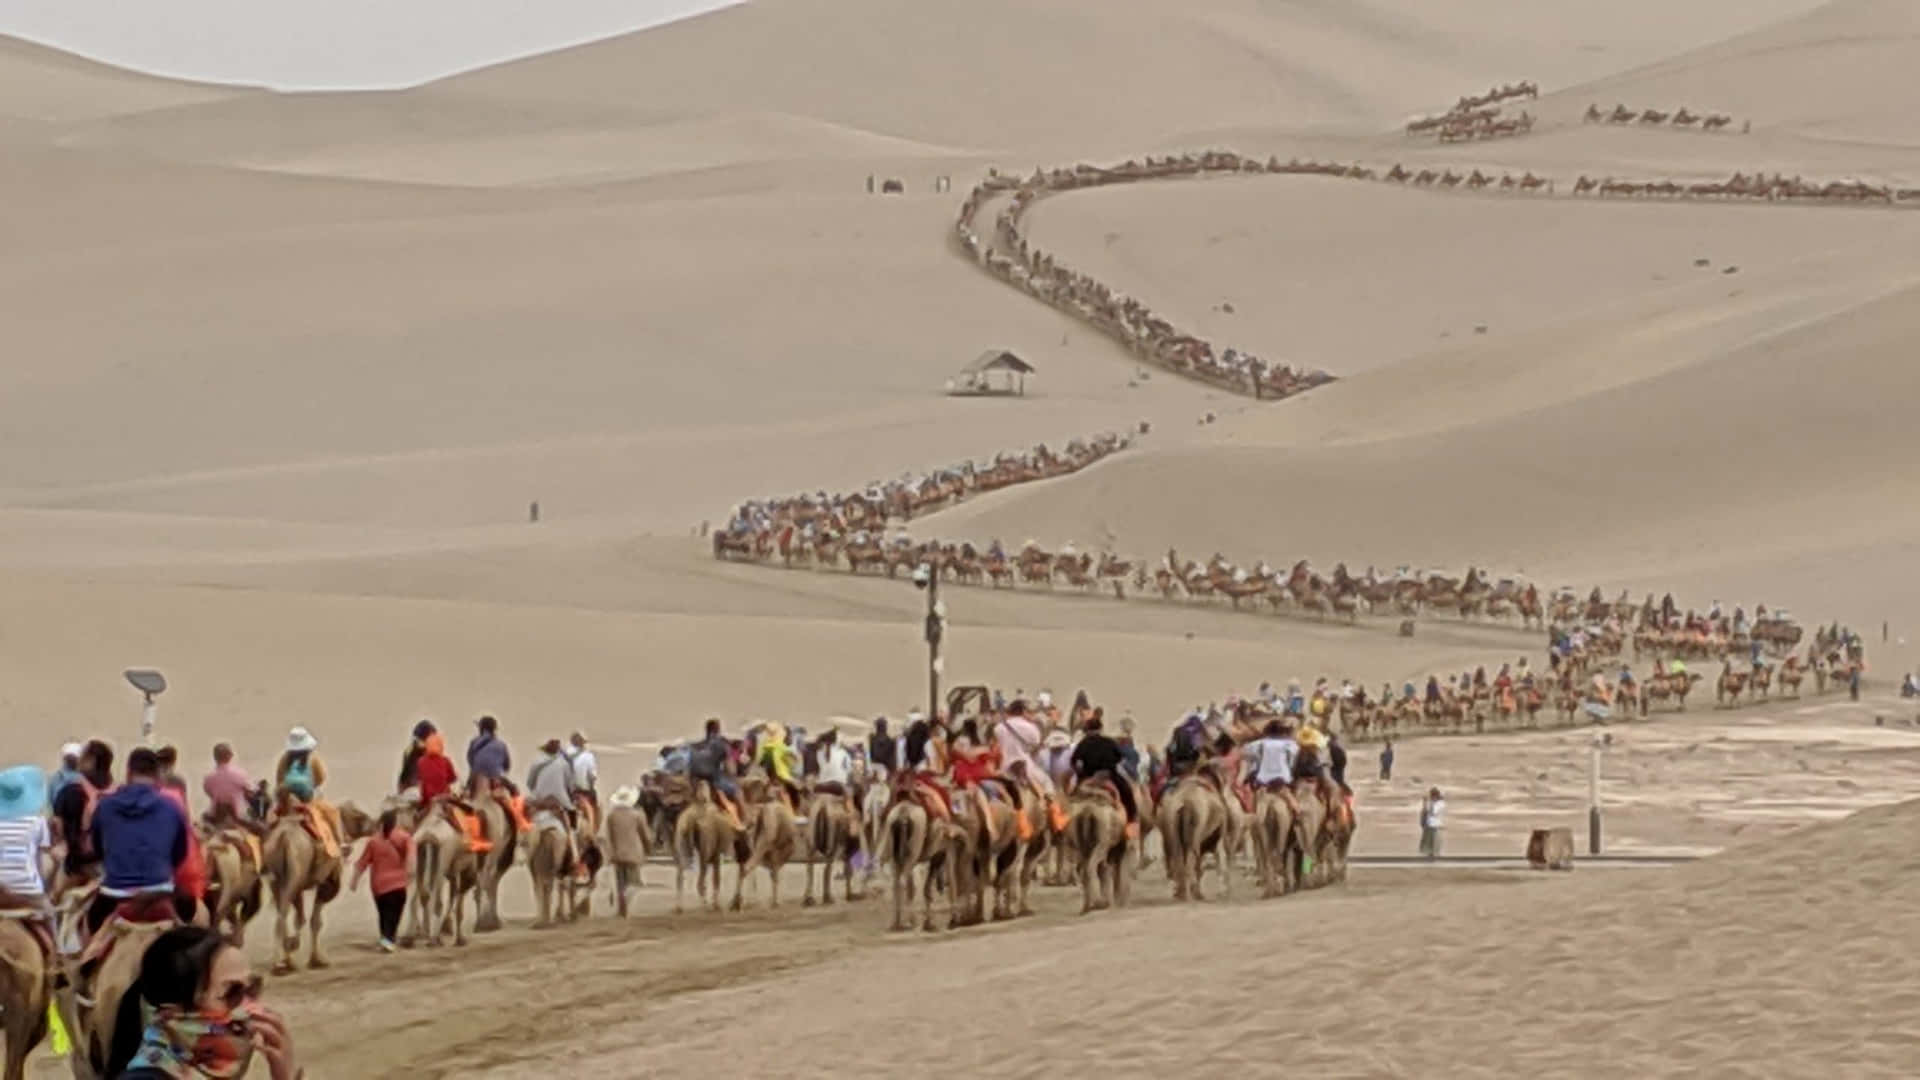 a group of people riding camels down a desert